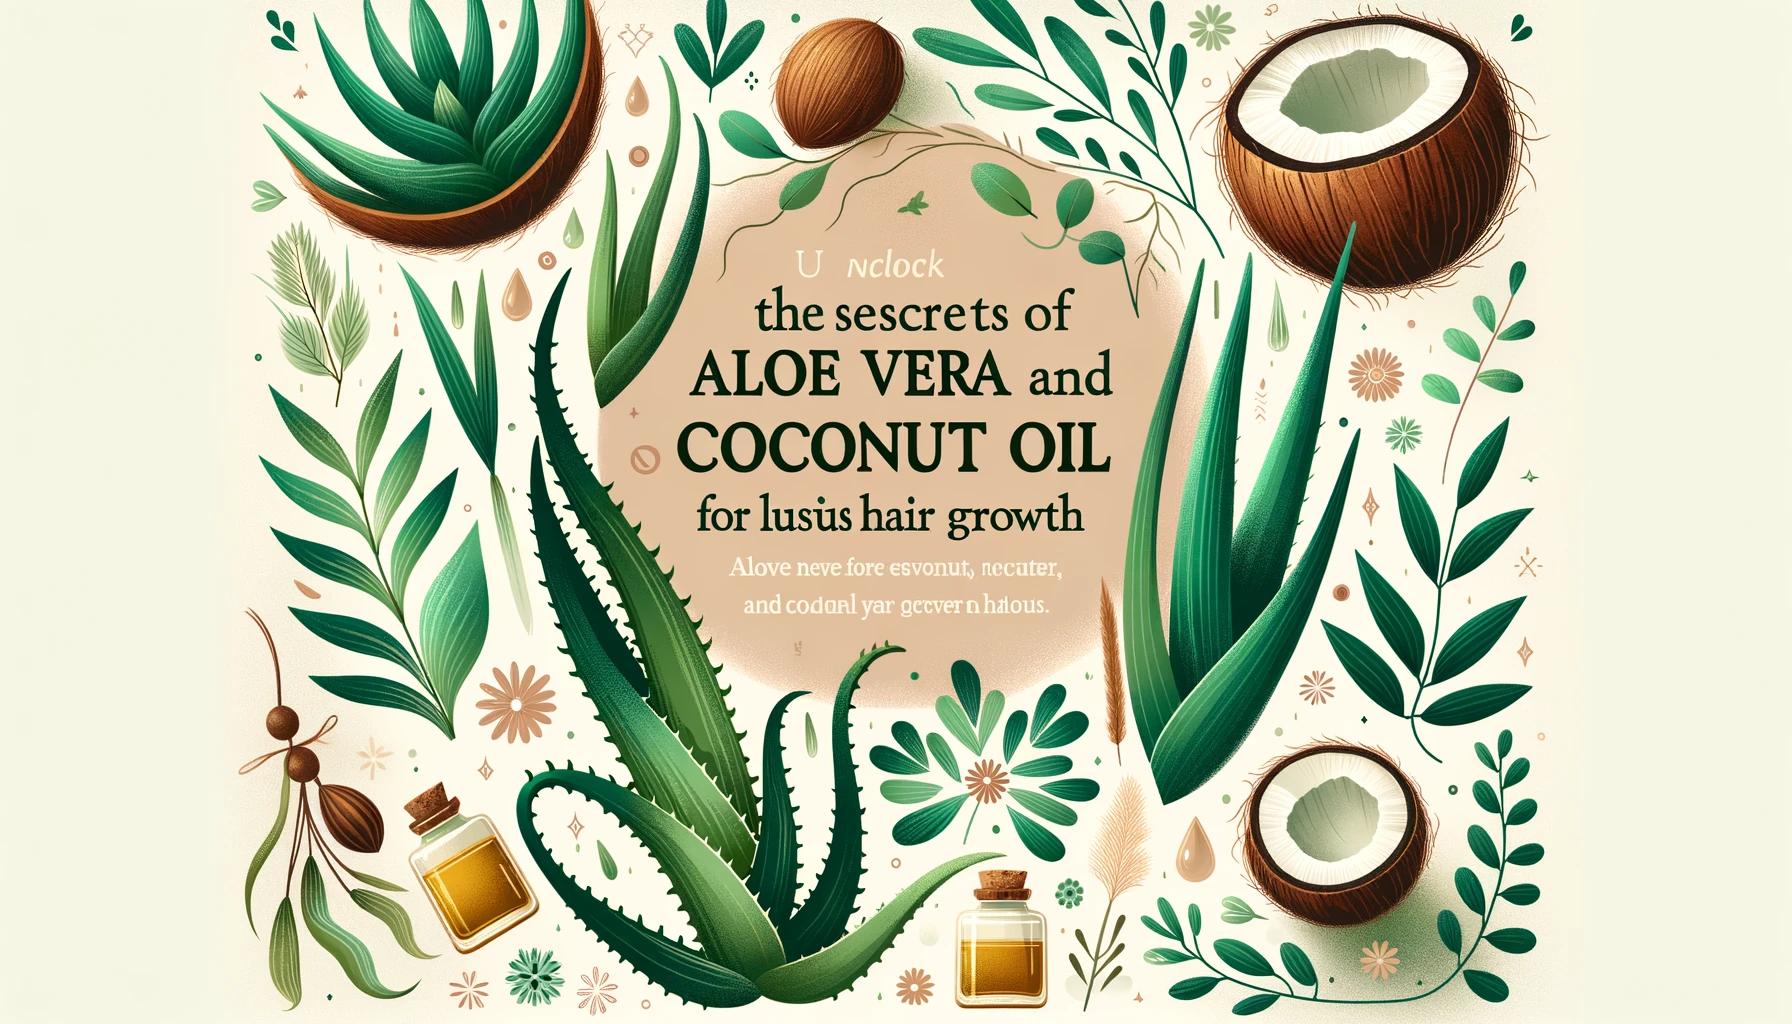 blog featured image on the benefits of Aloe Vera and Coconut Oil for hair growth